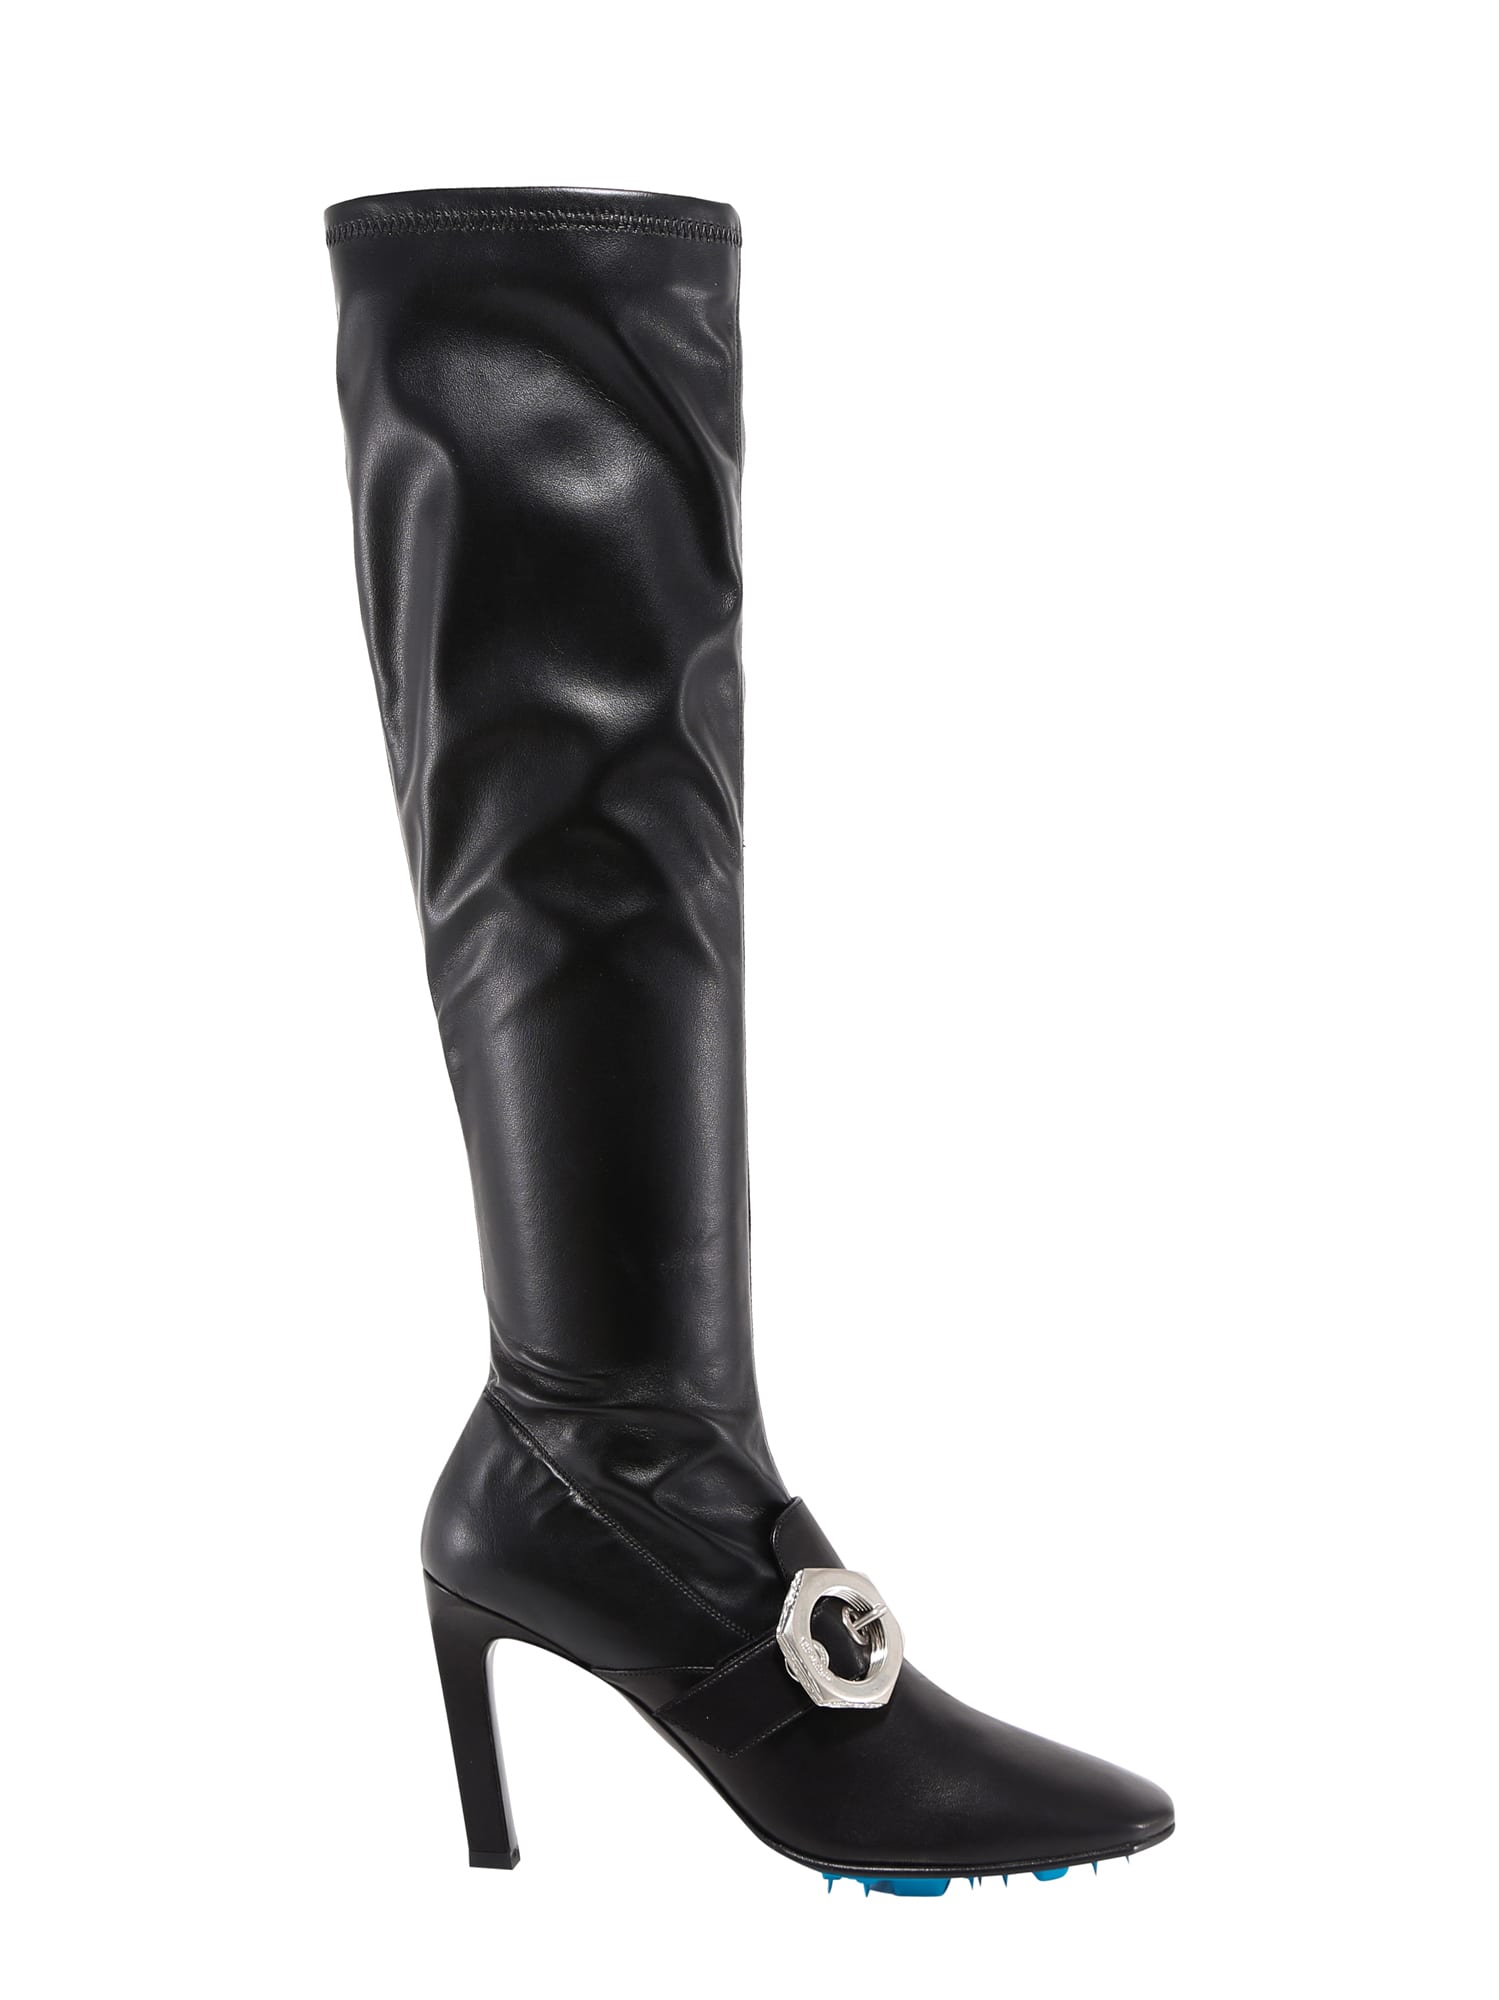 OFF-WHITE BUCKLE-DETAIL OVER-THE-KNEE BOOTS,OWIA247E20LEA004 1000